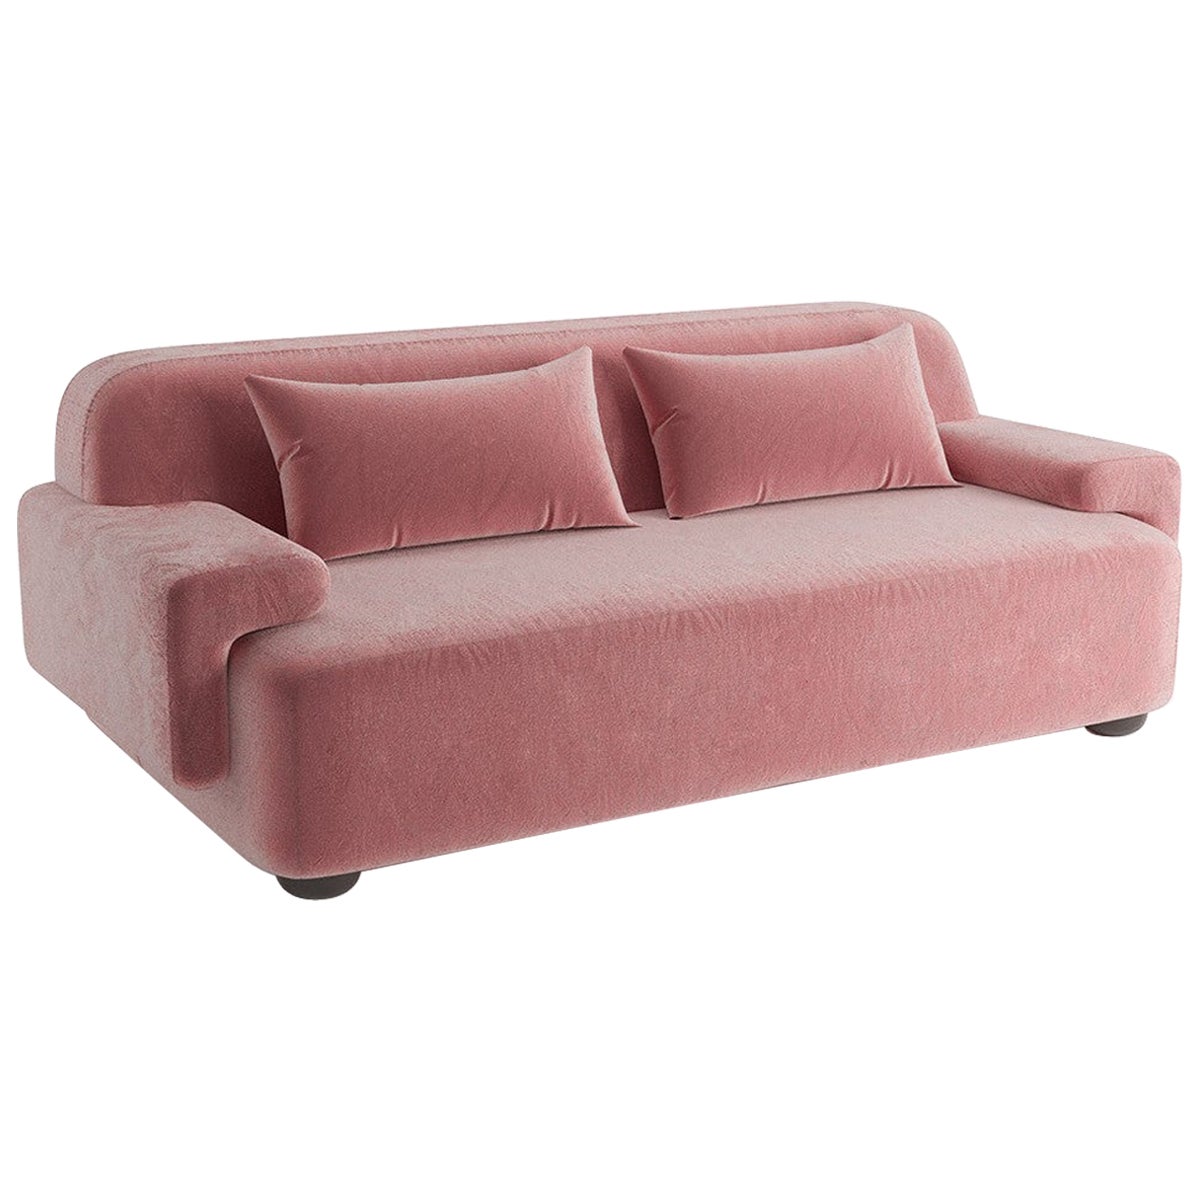 Popus Editions Lena 4 Seater Sofa in Pink Verone Velvet Upholstery For Sale